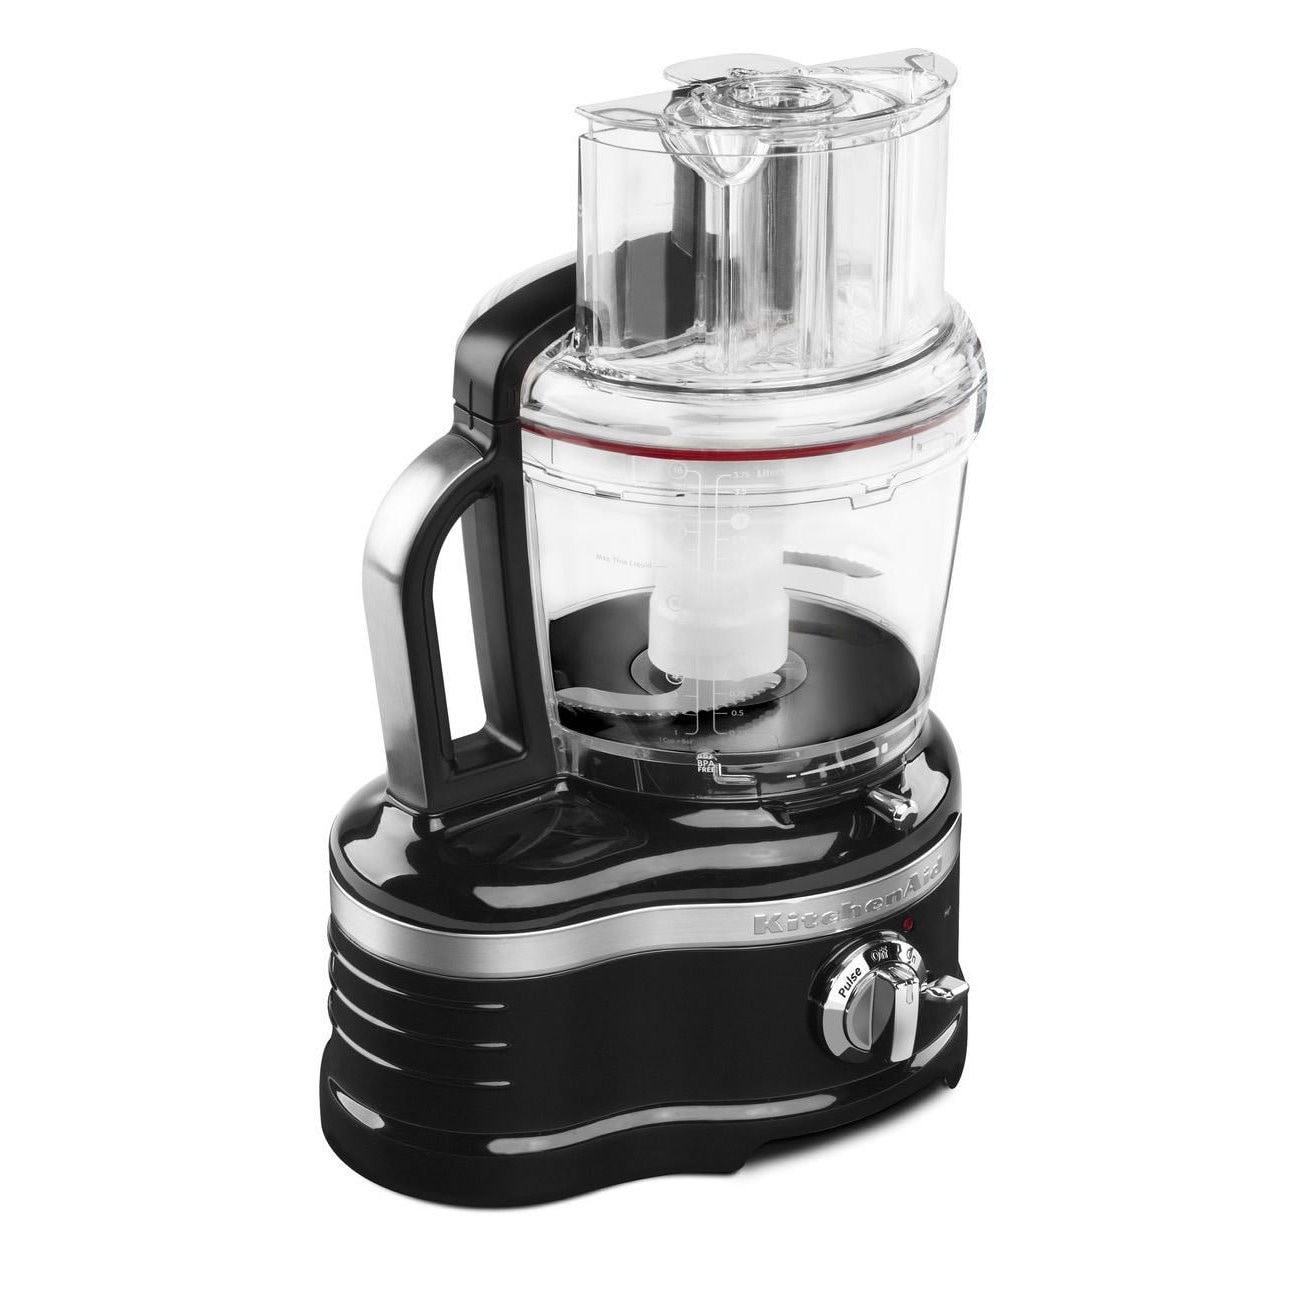 https://ak1.ostkcdn.com/images/products/9036476/KitchenAid-KFP1642OB-16-Cup-Onyx-Black-Food-Processor-with-Commercial-Style-Dicing-L16235153.jpg